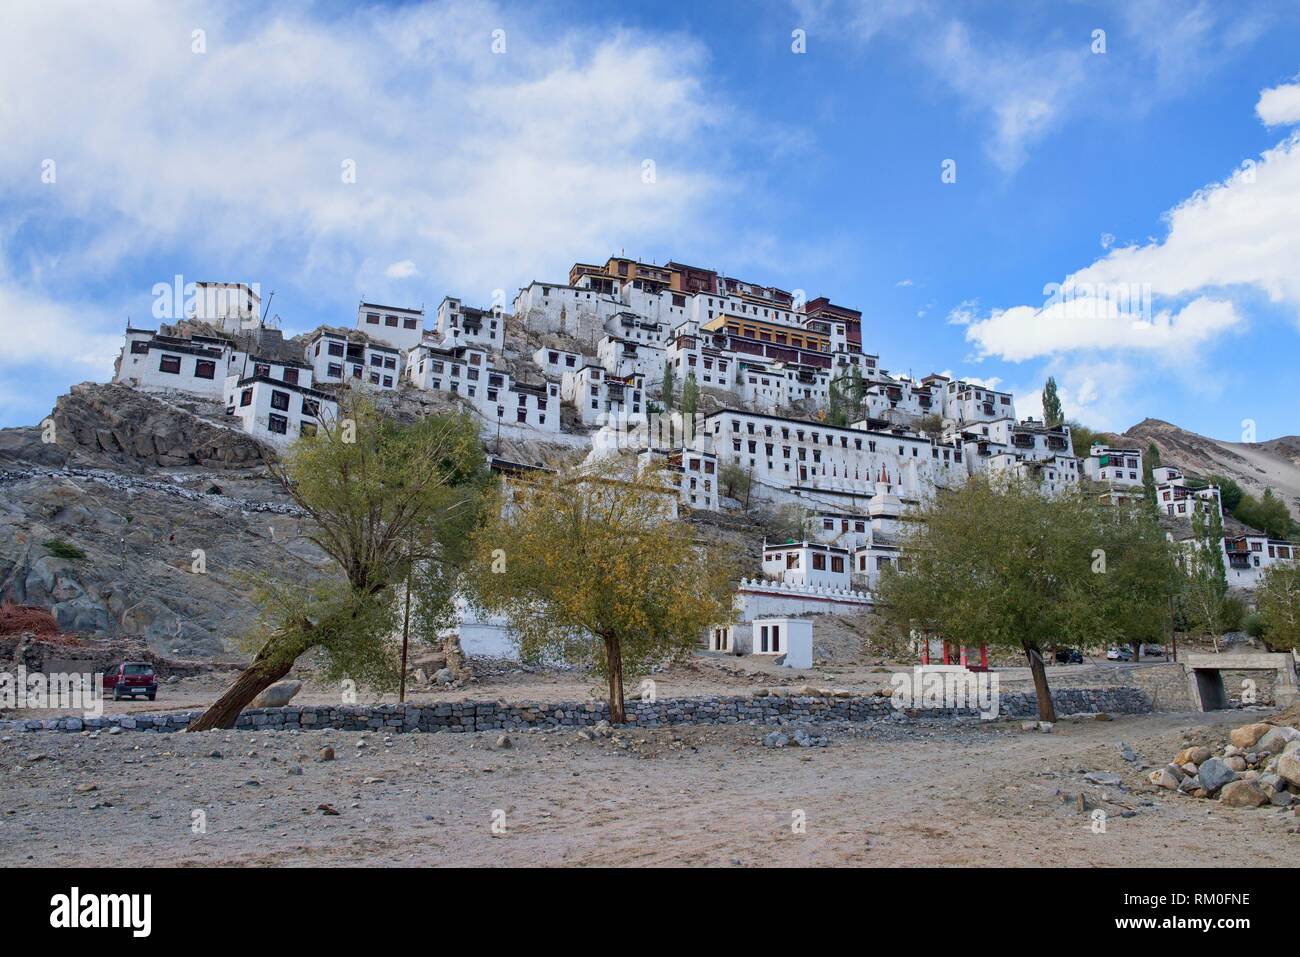 Thiksay Monastery (Thikse) perched on a hillside, Indus Valley, Ladakh, India. Stock Photo